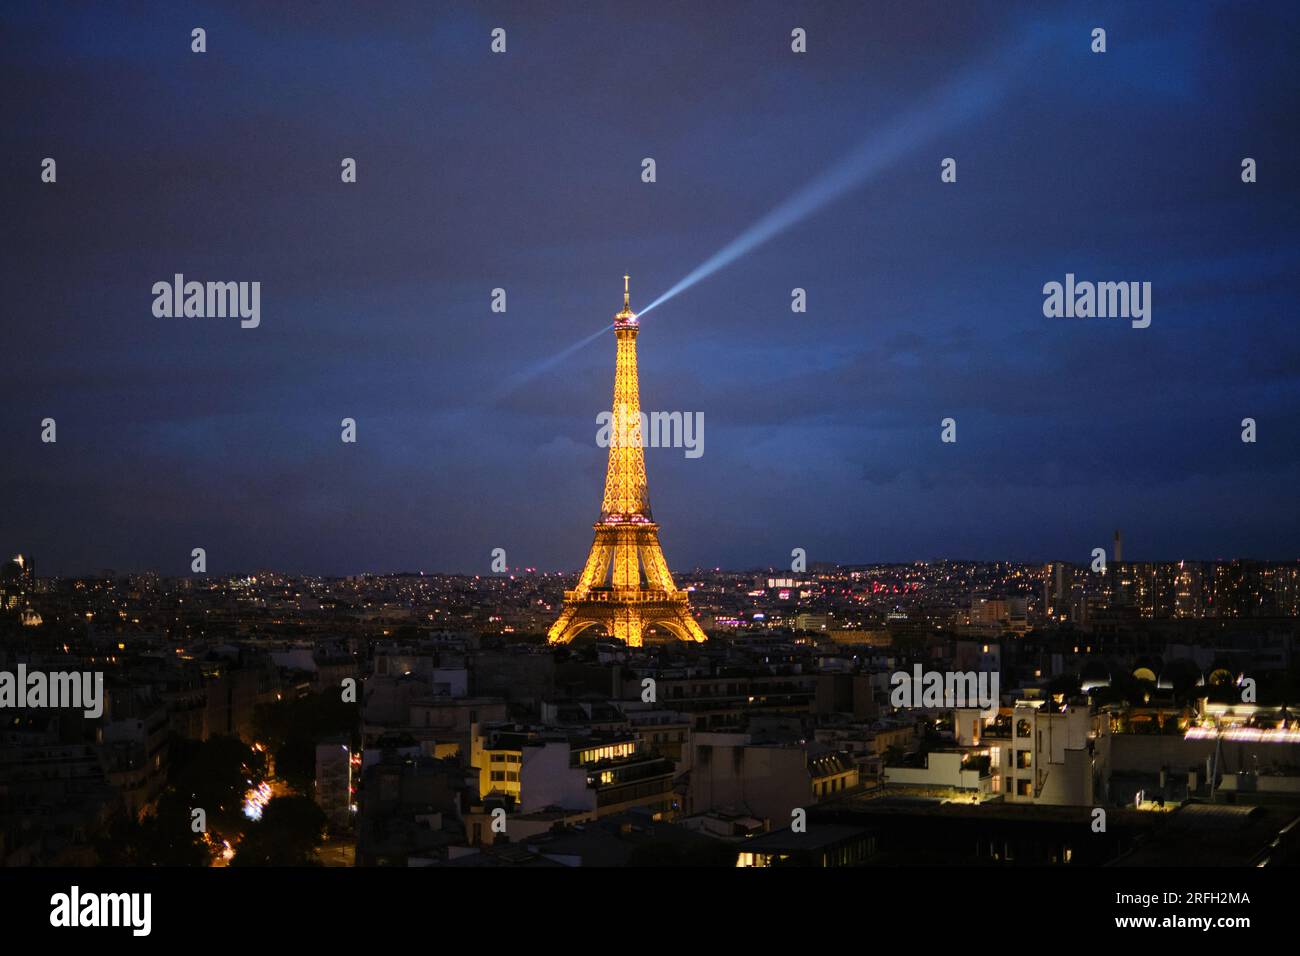 The Eiffel Tower lit up at night with the rotating beacon at the top over the city of Paris Stock Photo